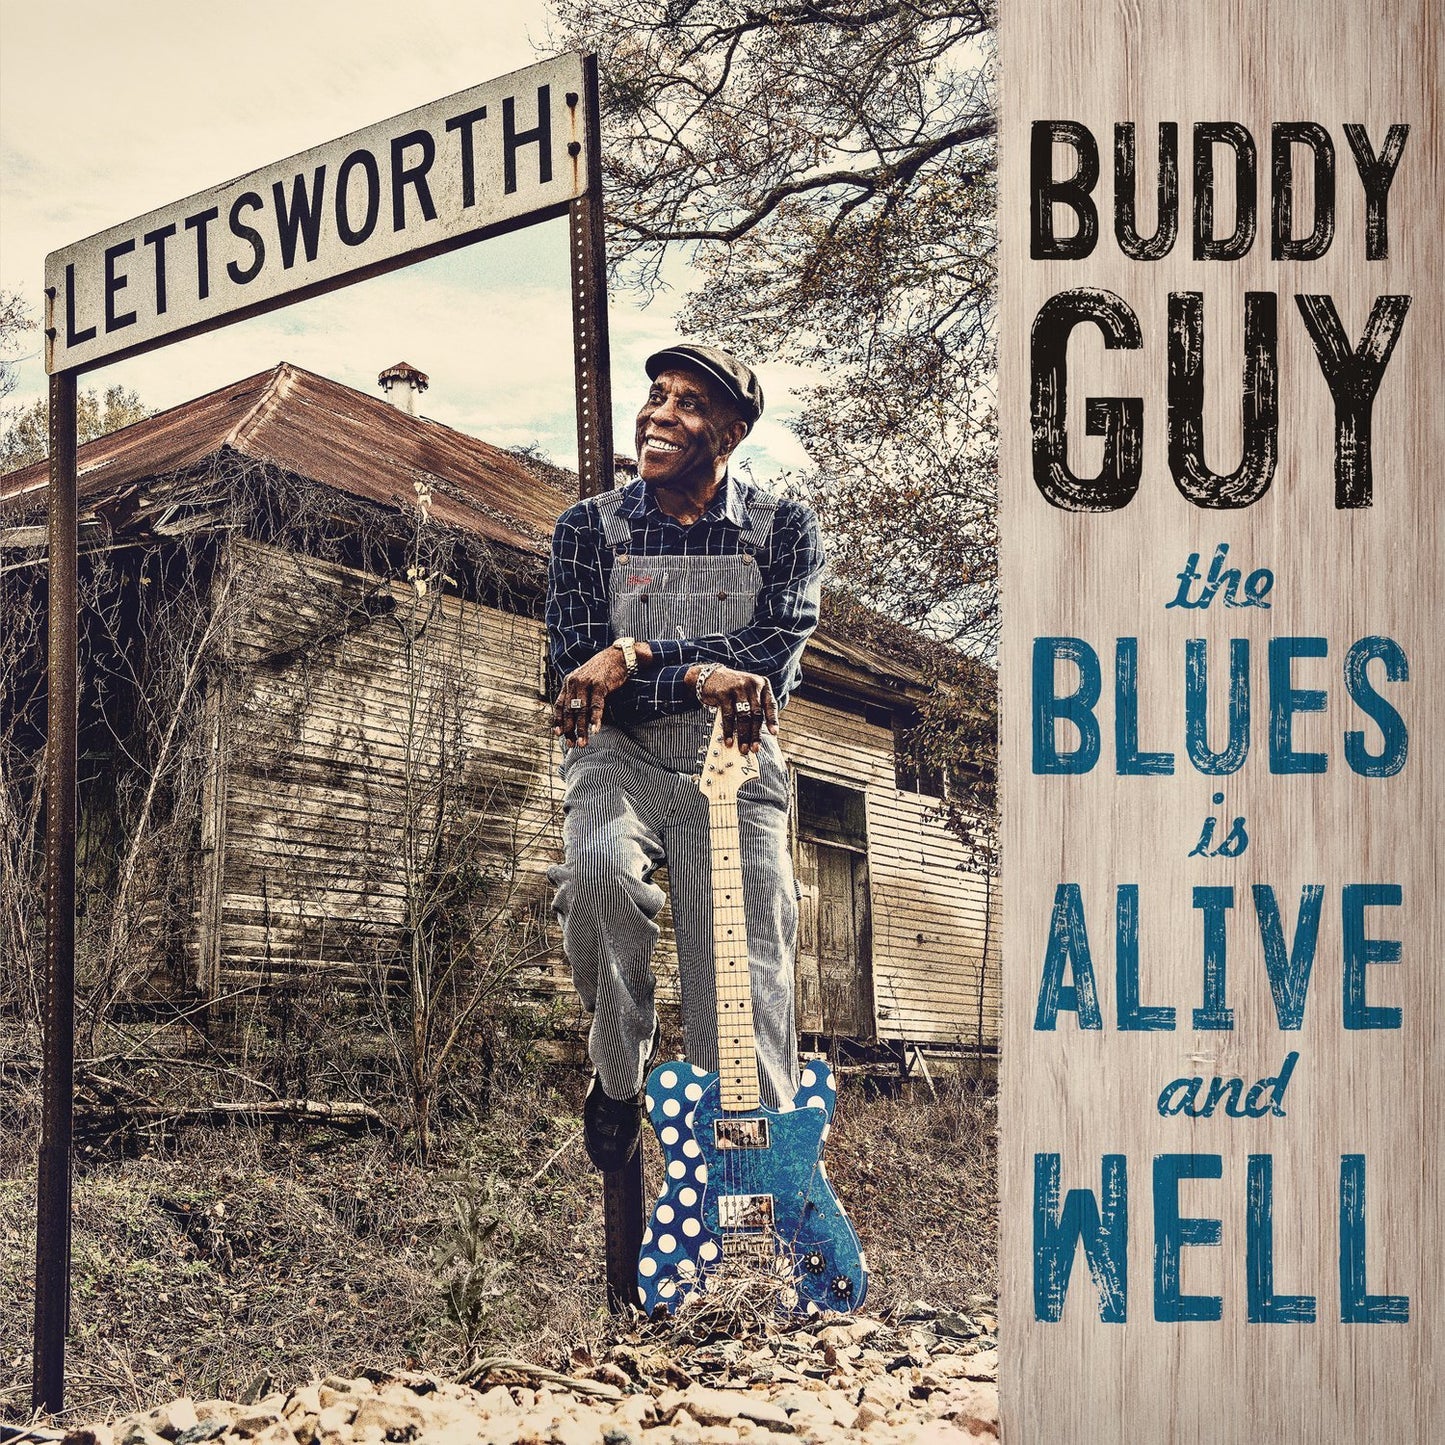 Guy, Buddy - Blues is Alive and Well